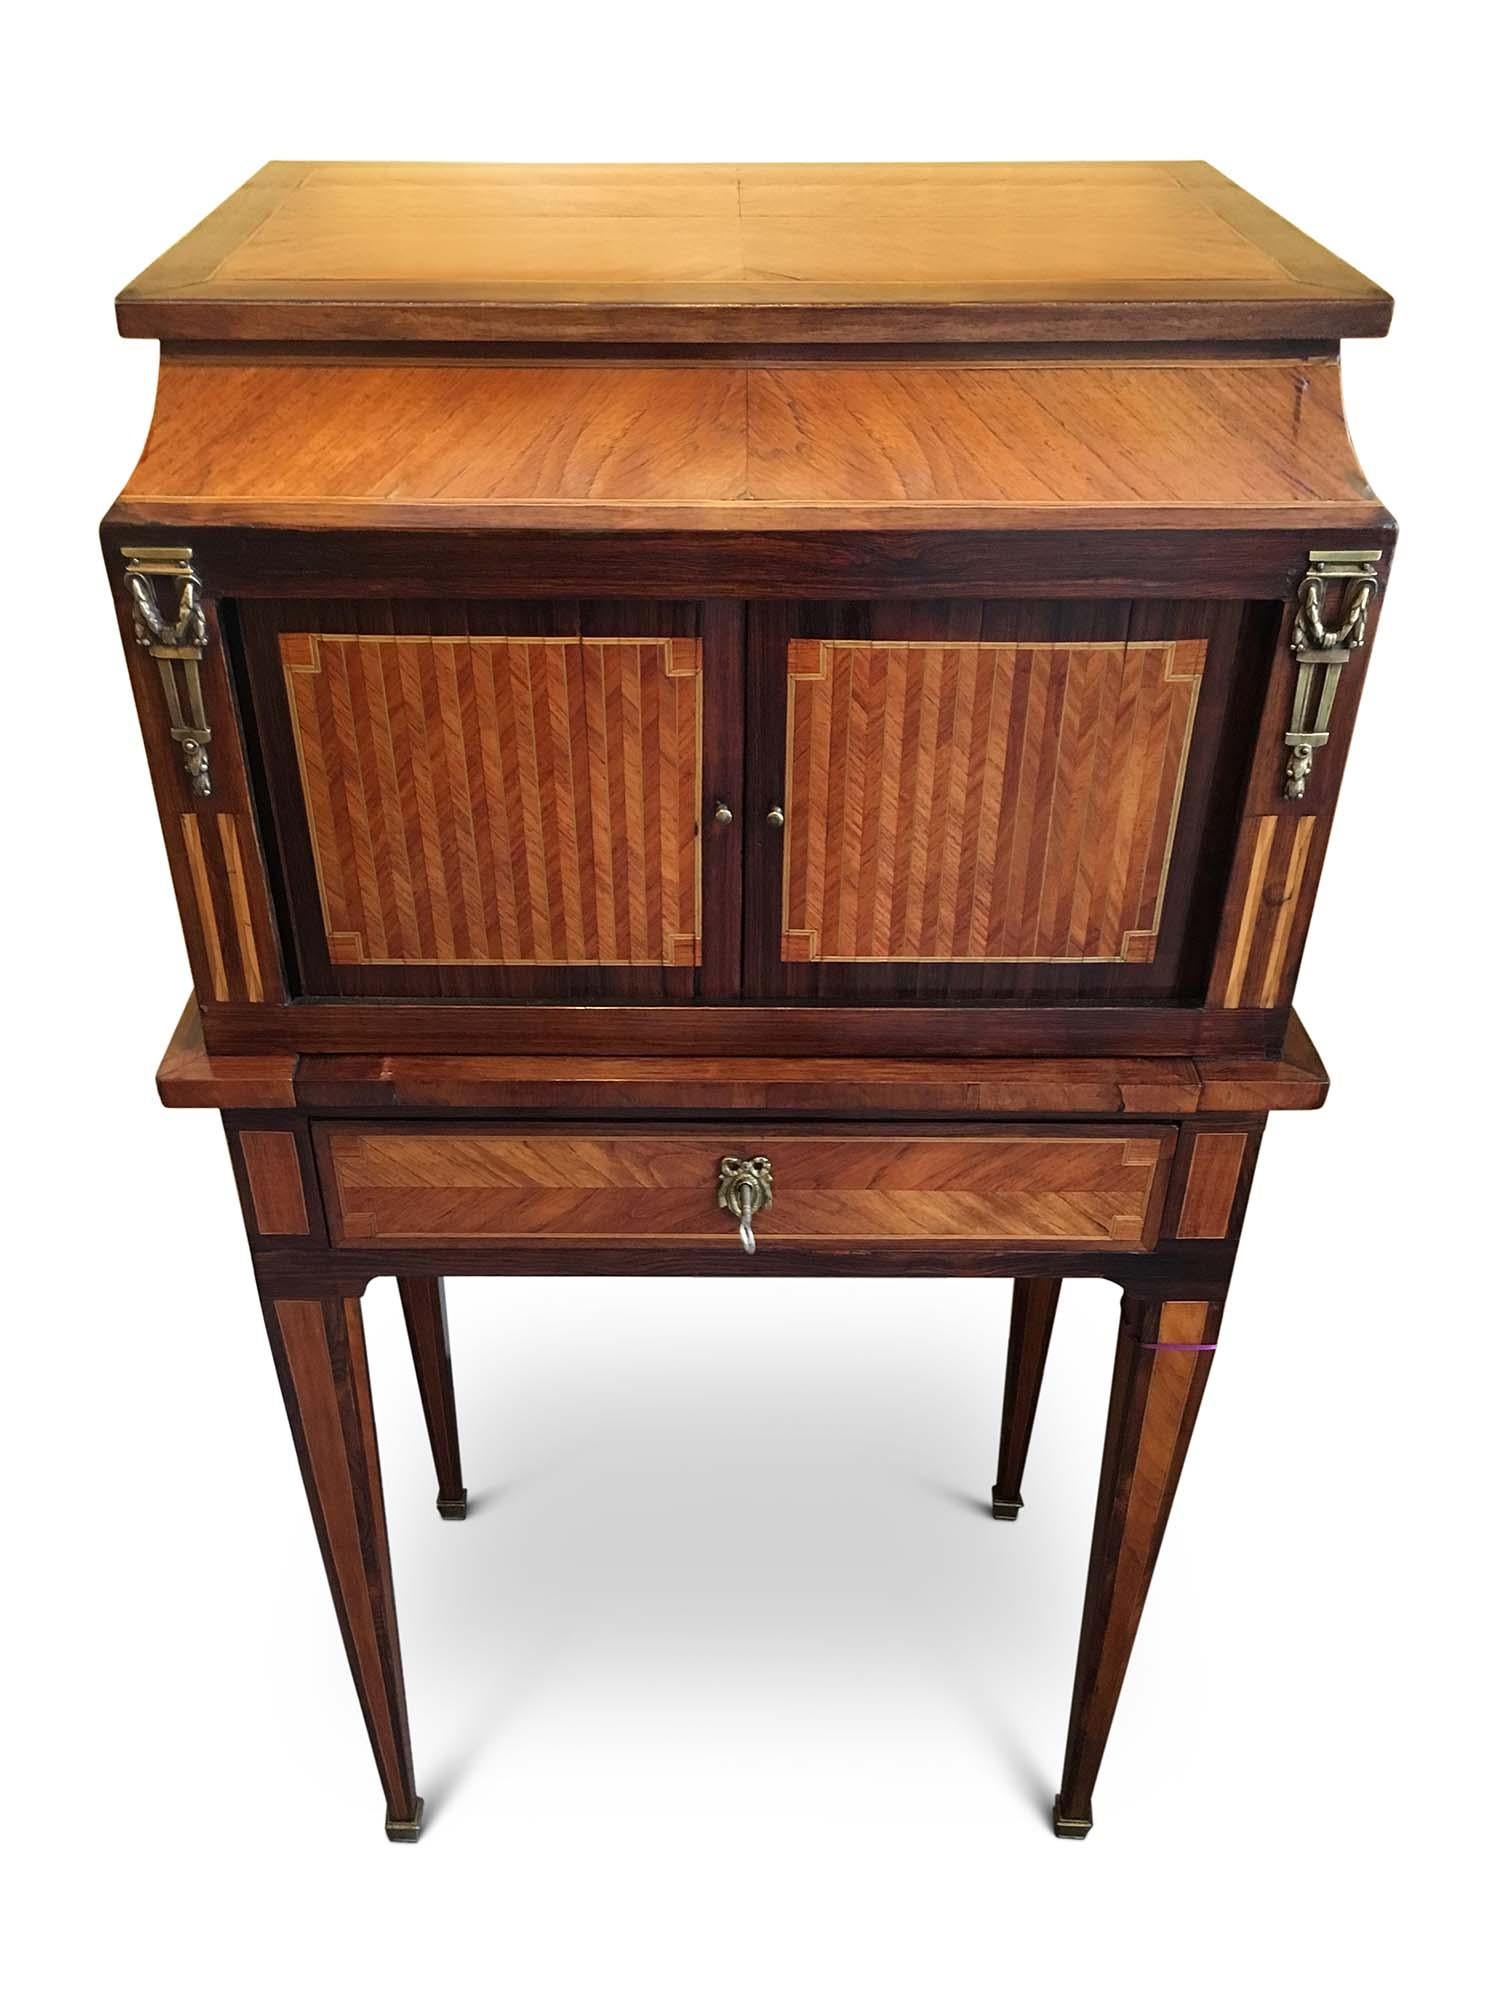 Superb quality Bonheur De Jour
Quarter veneered top and sides with satinwood stringing.
Two finely inlaid doors with herring bone pattern and symmetrical satinwood stringing, flanked by brass mounts, the inner fitted with pigeon hole and two small